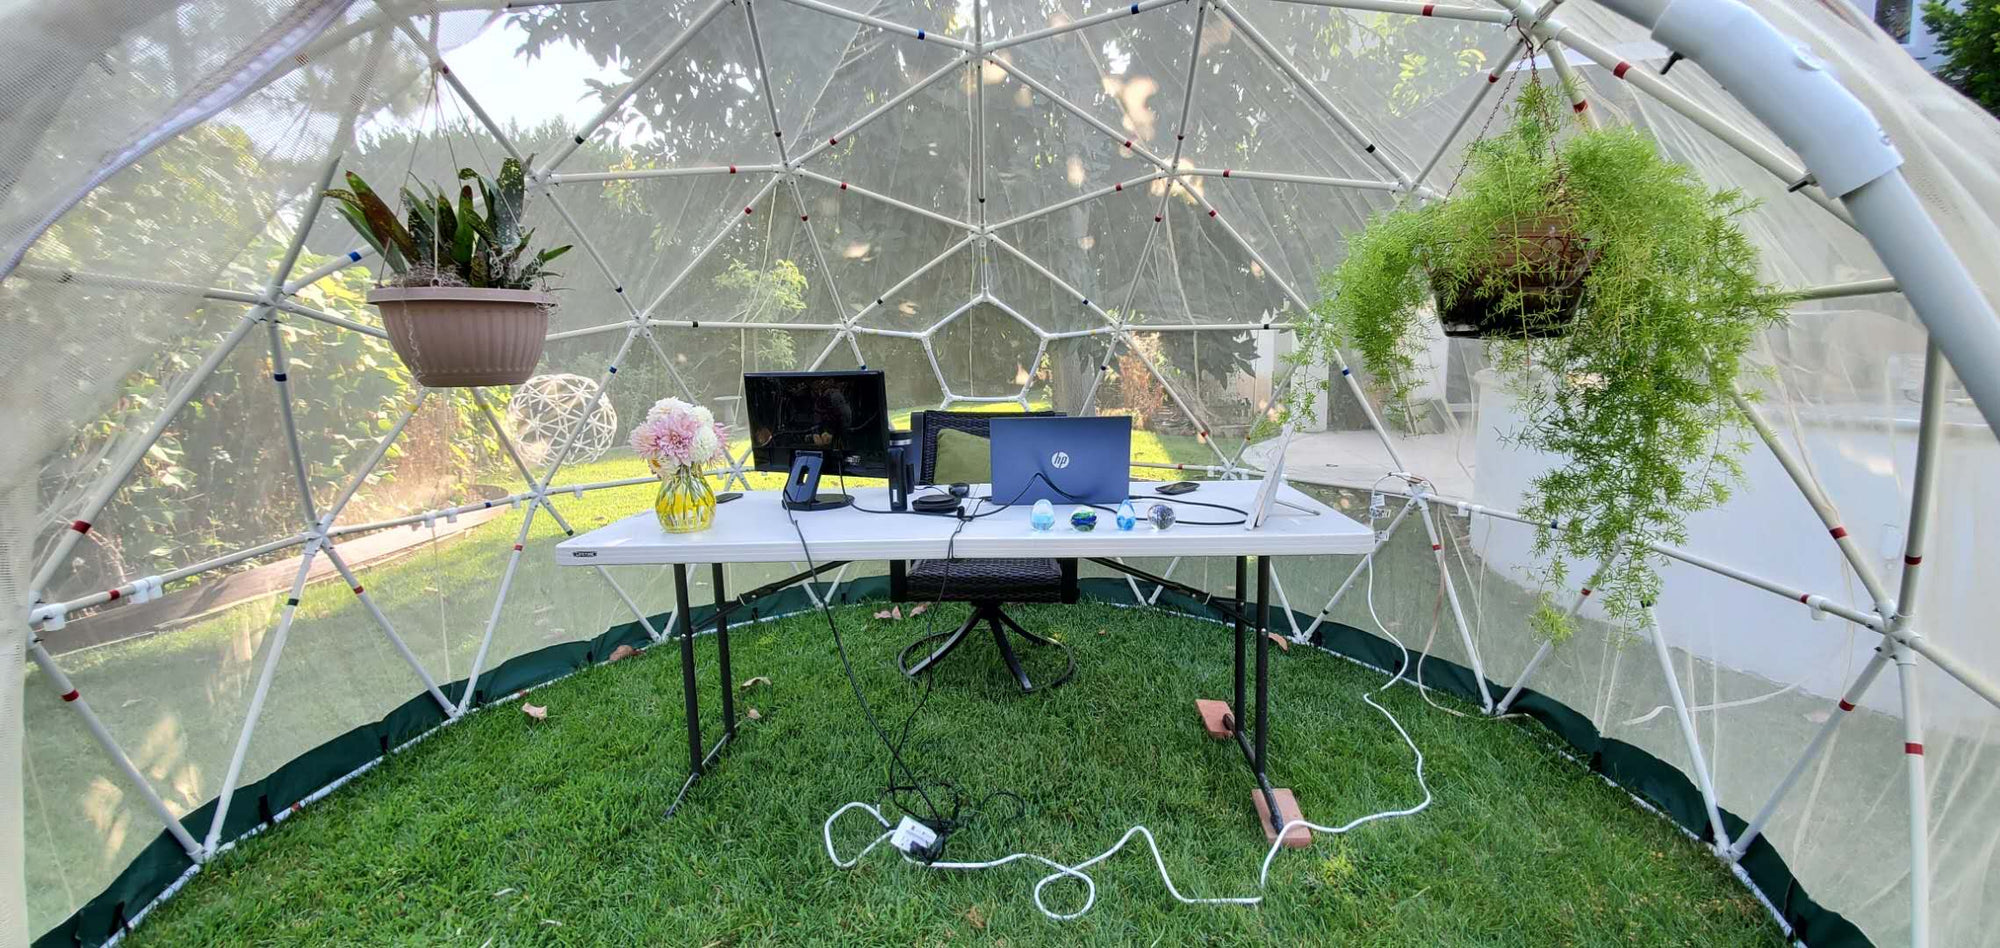 Mosquito Dome in the garden makes a great office